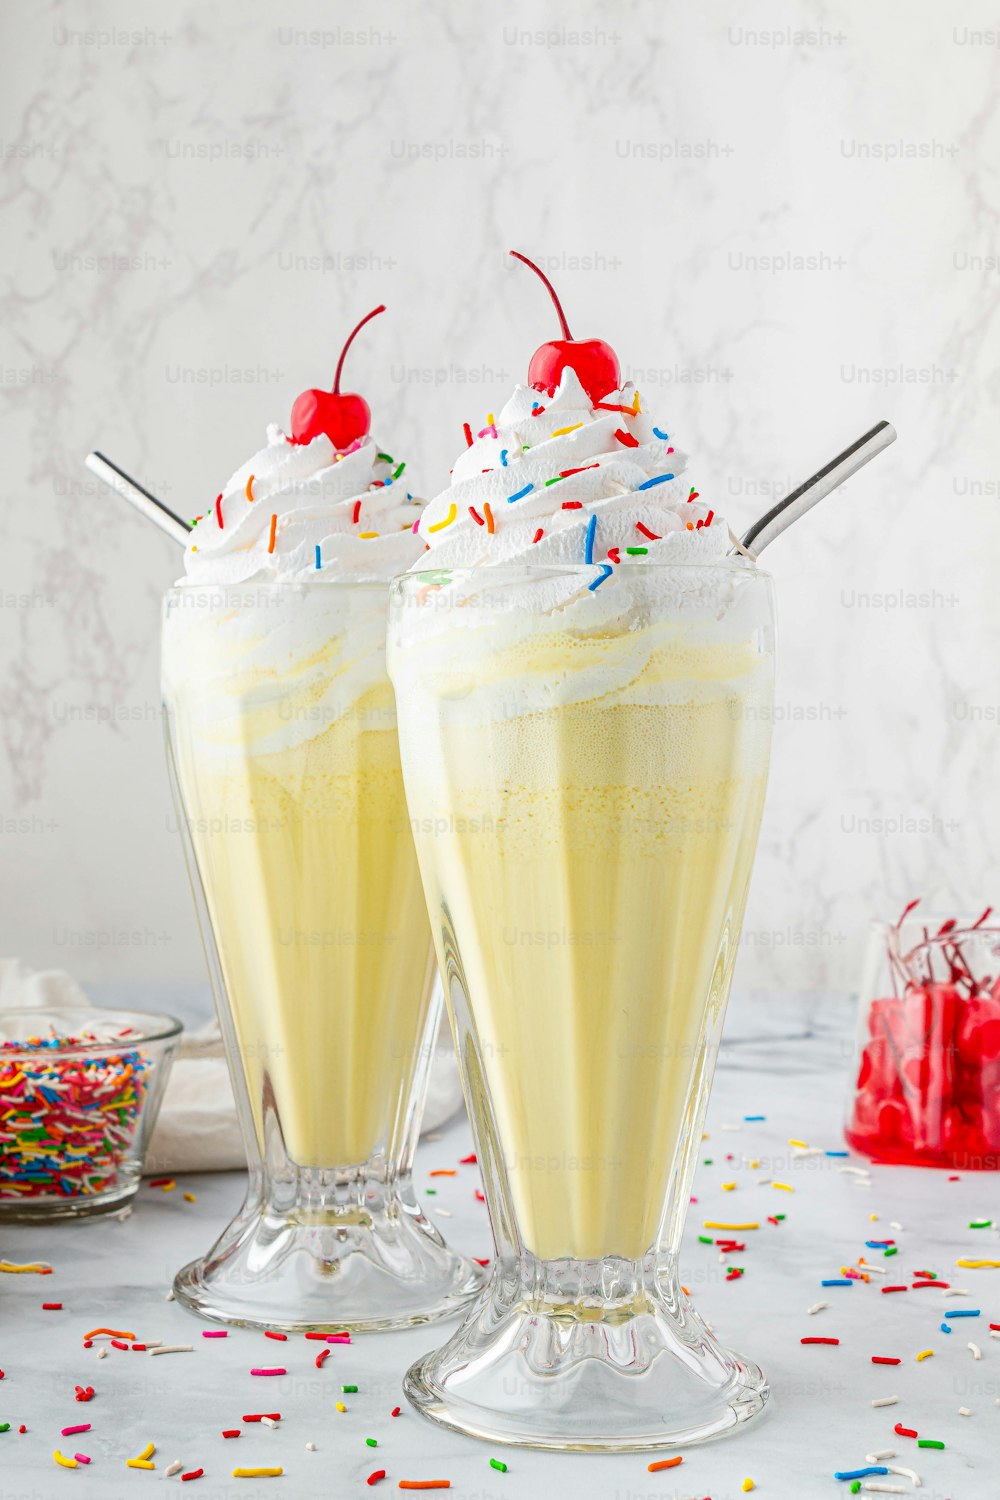 two glasses filled with yellow liquid and topped with whipped cream and sprinkles